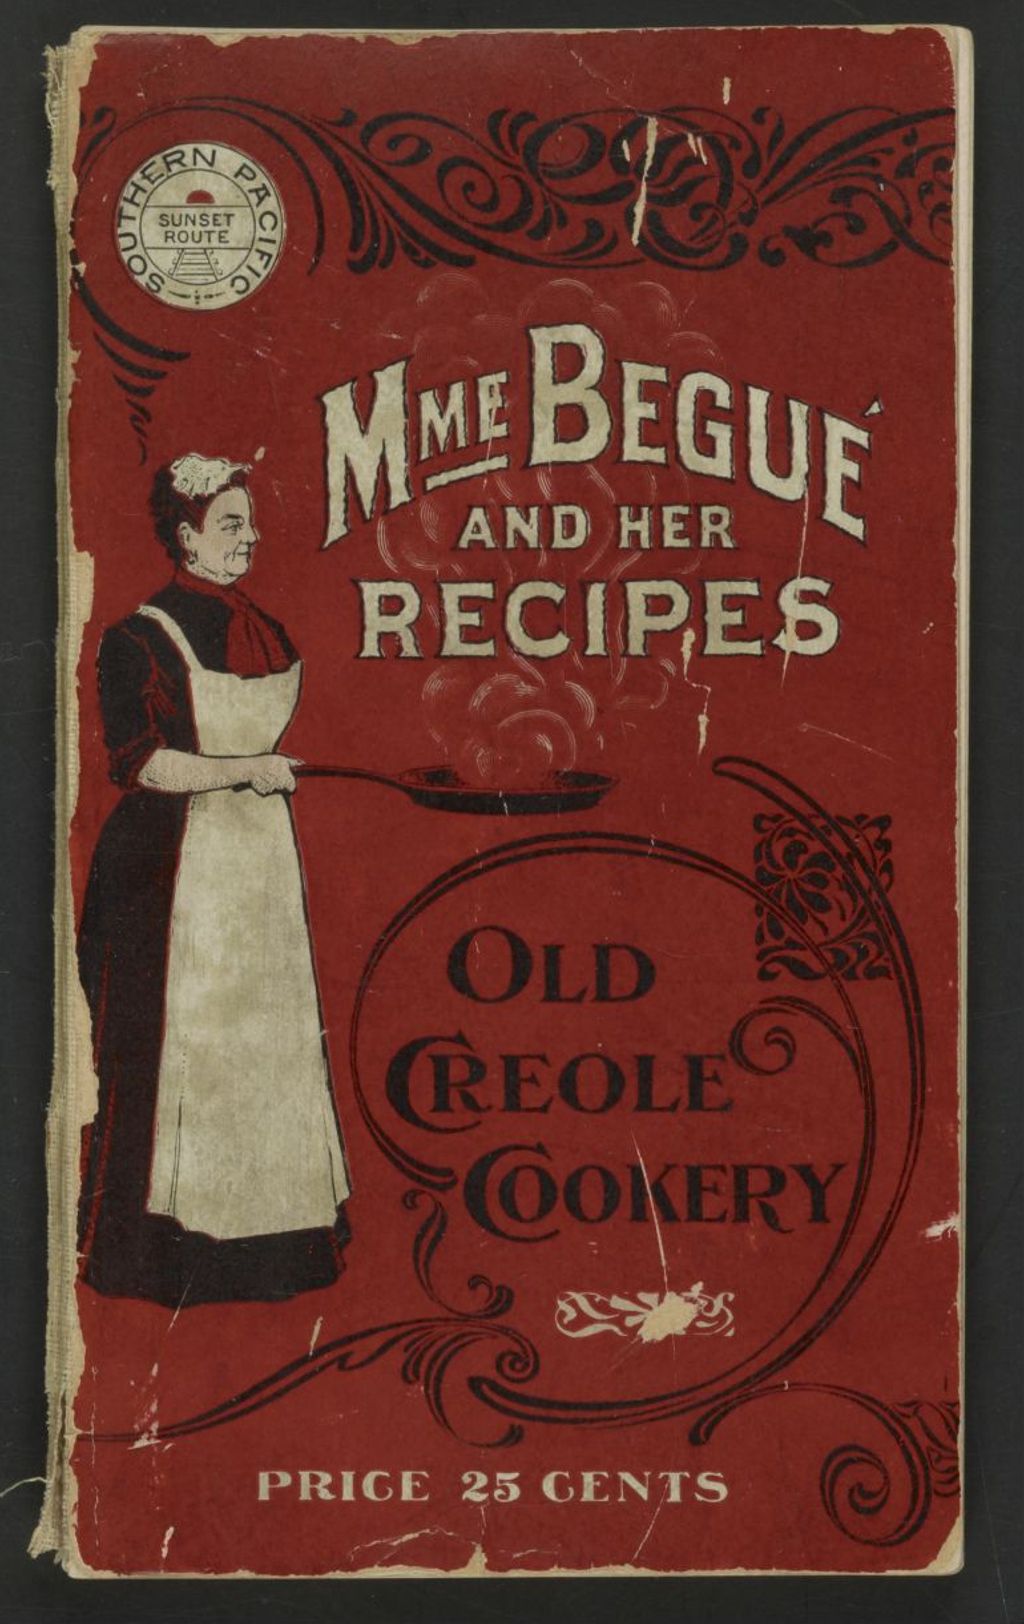 Miniature of Mme. Begué and her recipes. Old Creole cookery